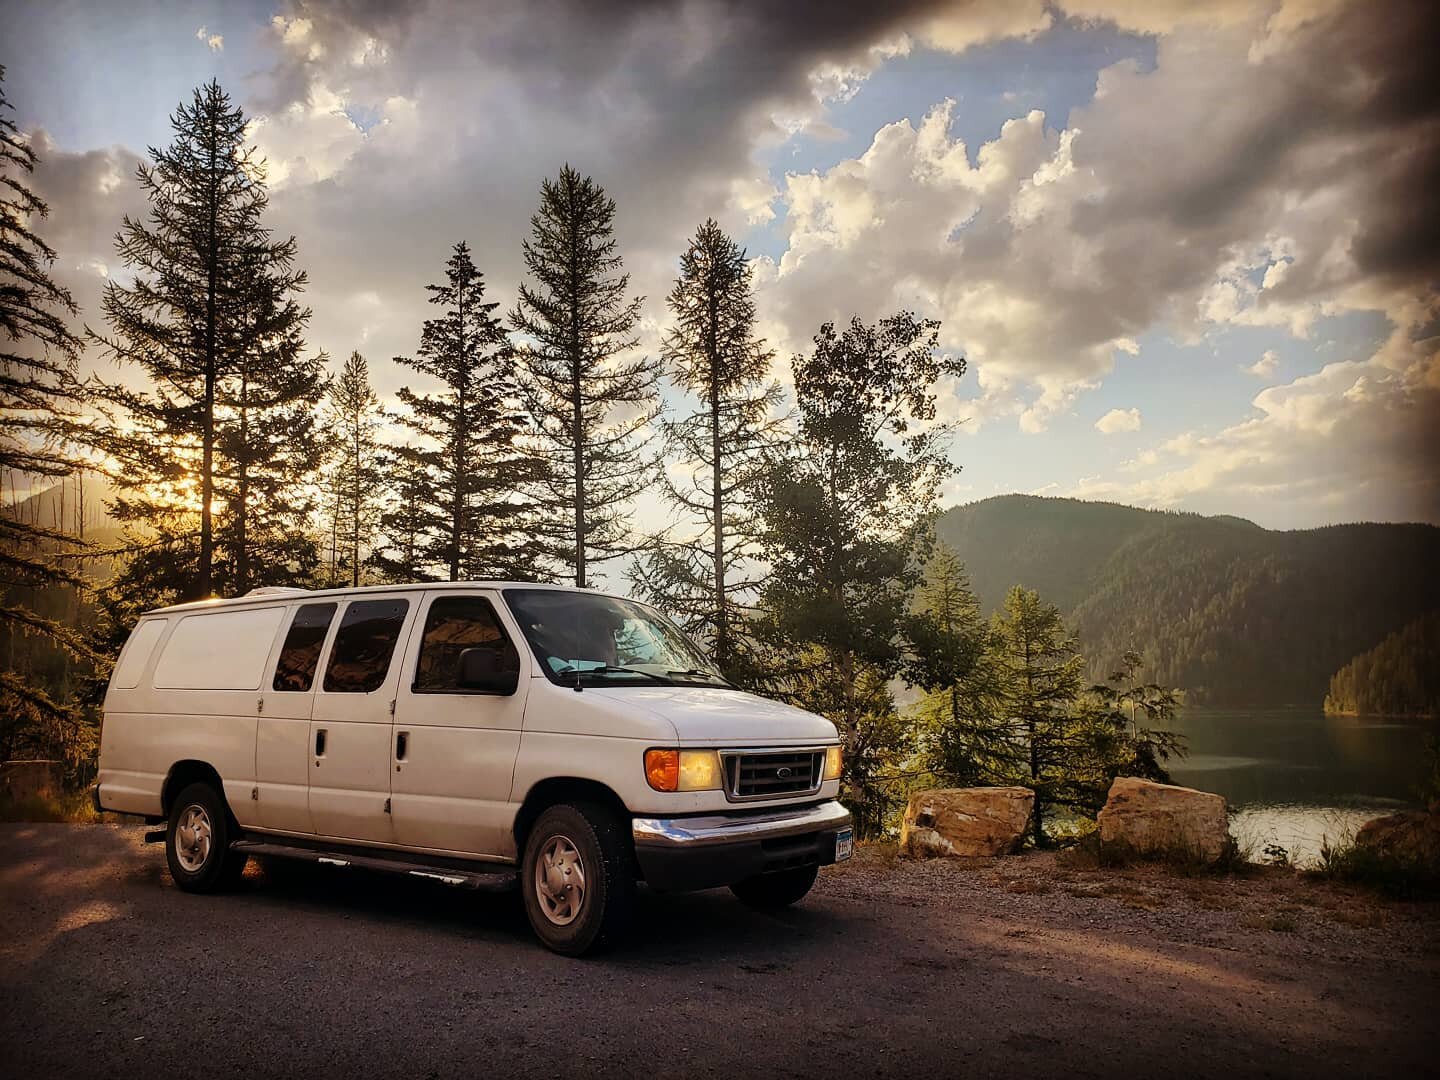 This little beauty will be coming home with a little more dust and a lot more squeaks. But how nice it is to have a comfy home-away-from-home. Montana has been good to us!